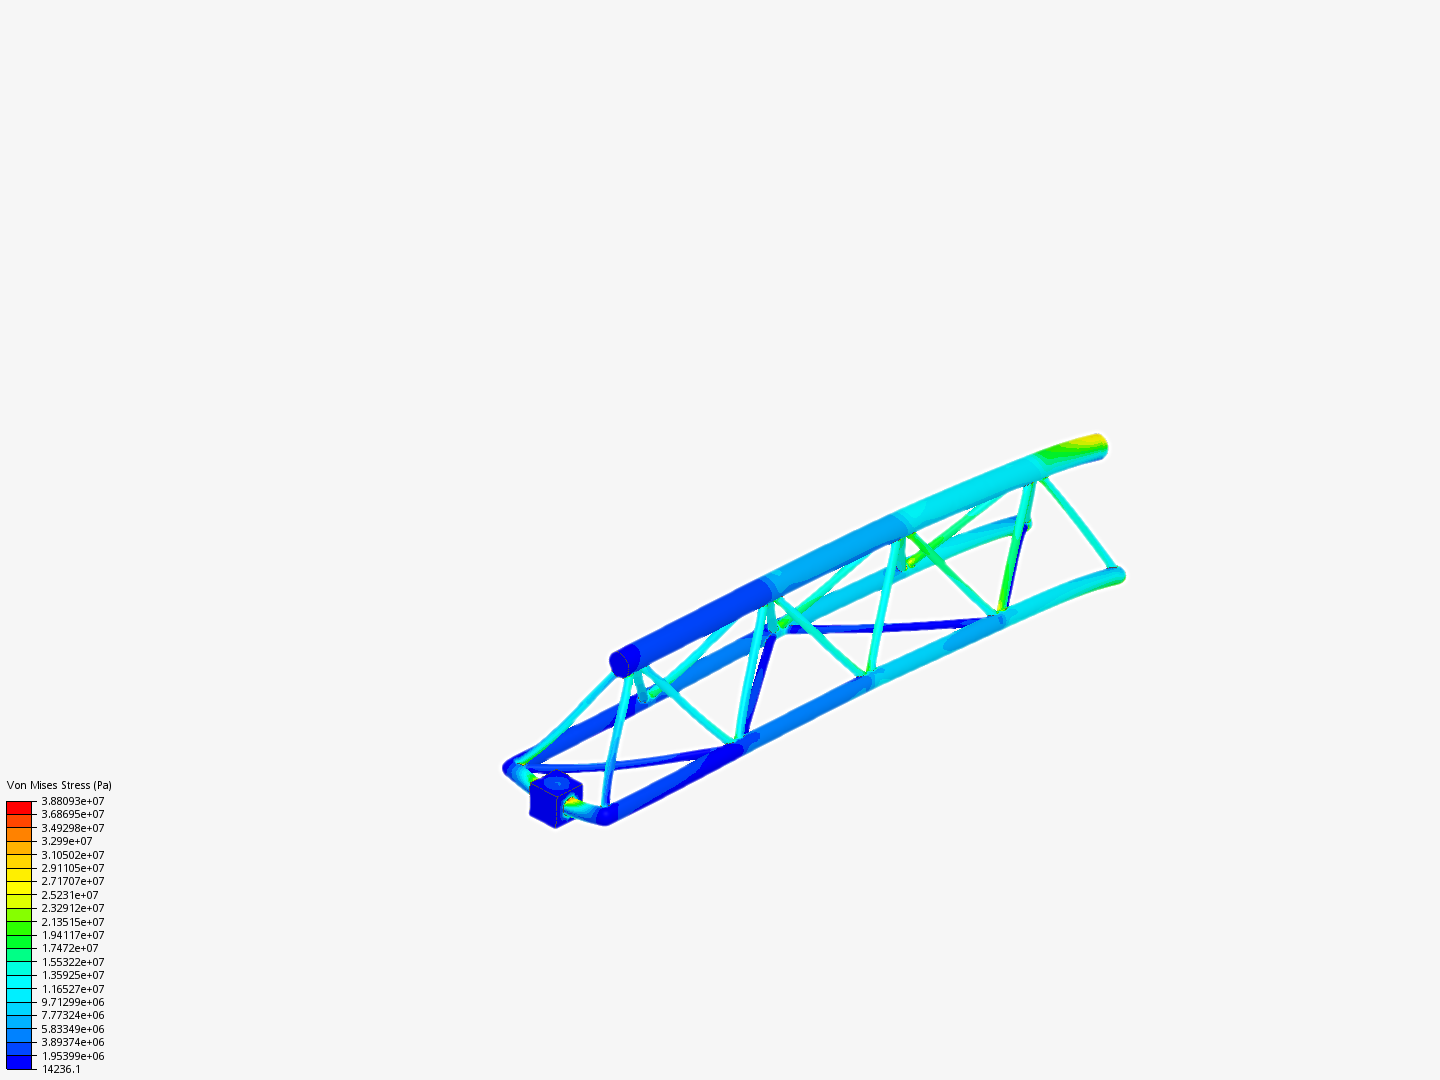 FEA project for KKE hands-on webinar. Based on: Tutorial - Linear static analysis of a crane - Copy image